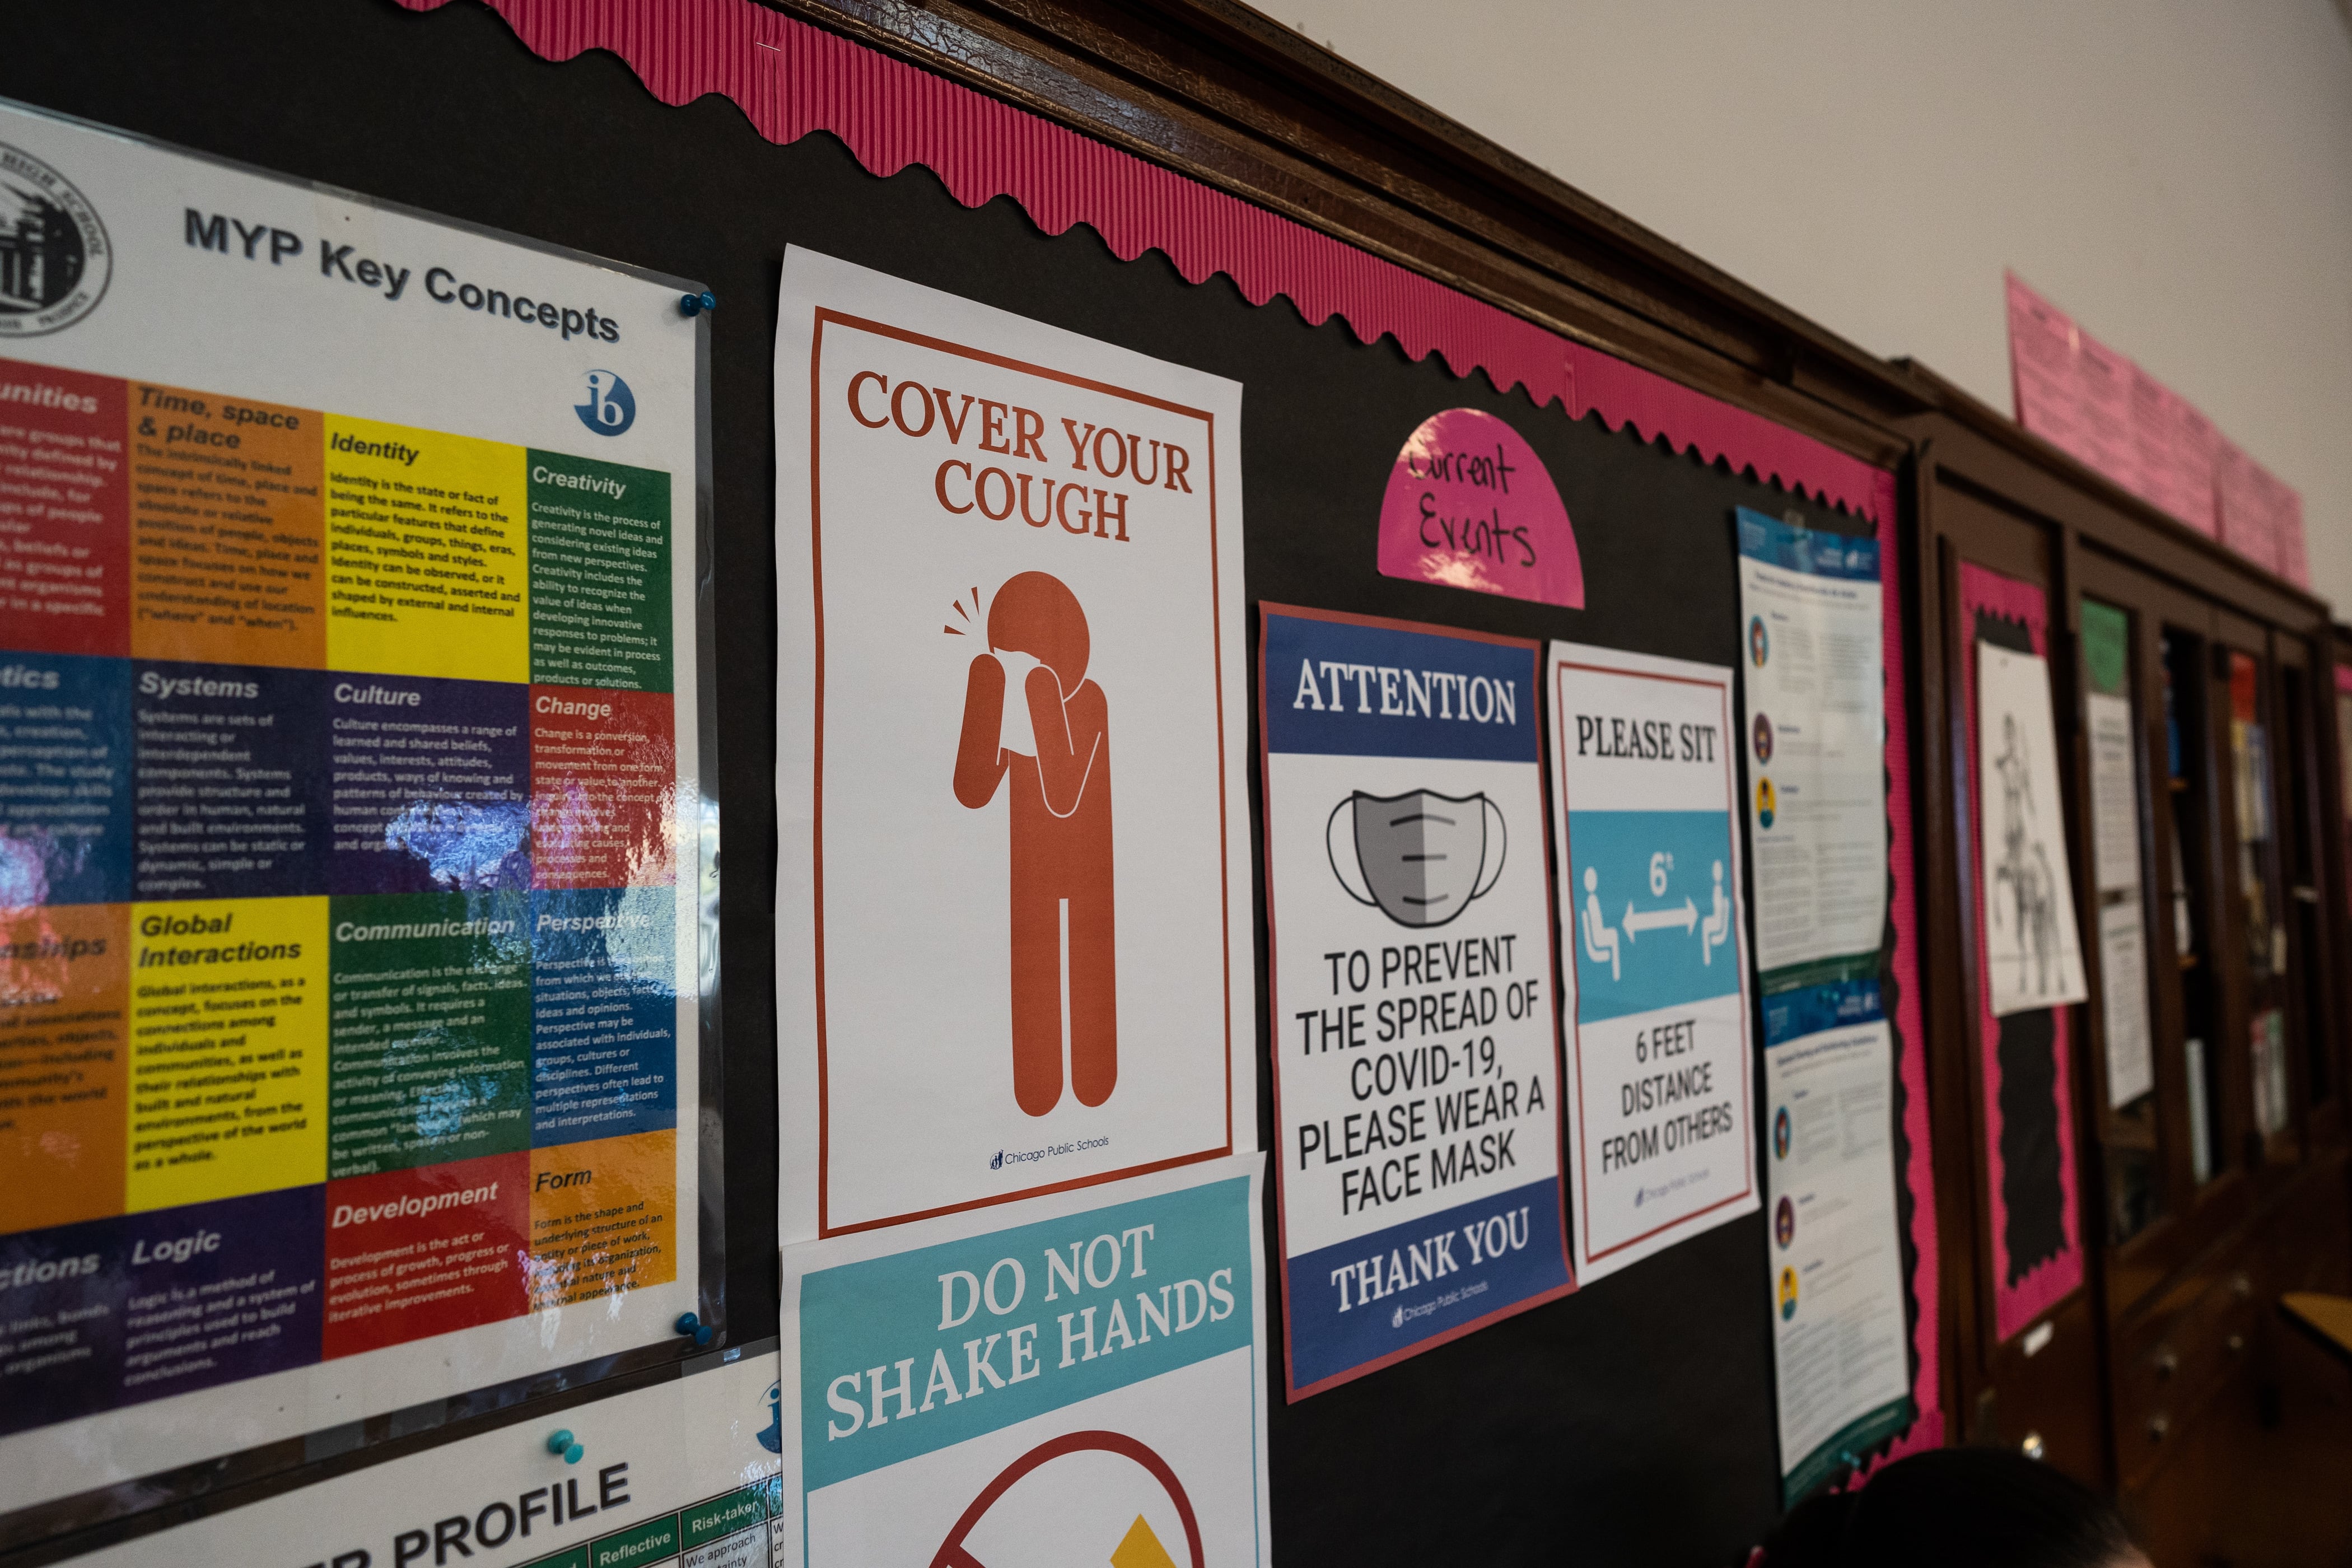 COVID-19 safety guidelines are seen in a classroom at Senn High School on April 23, 2021.